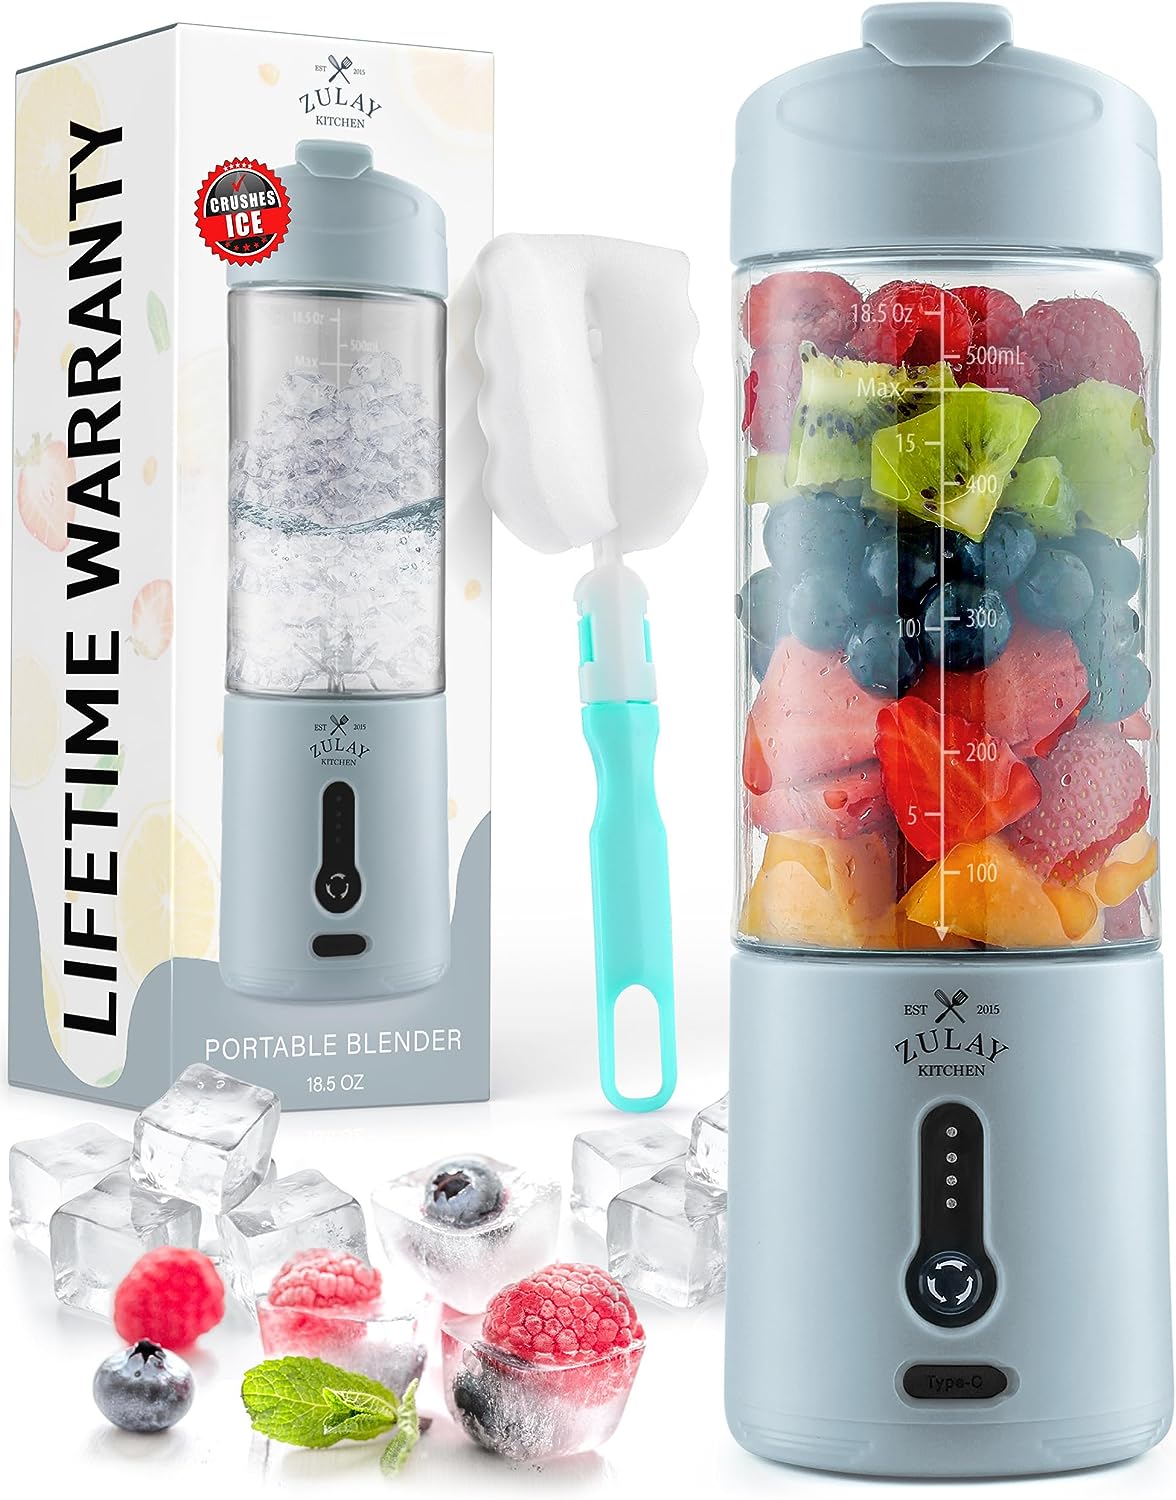 Zulay Kitchen Portable Blender with fruits and ice.